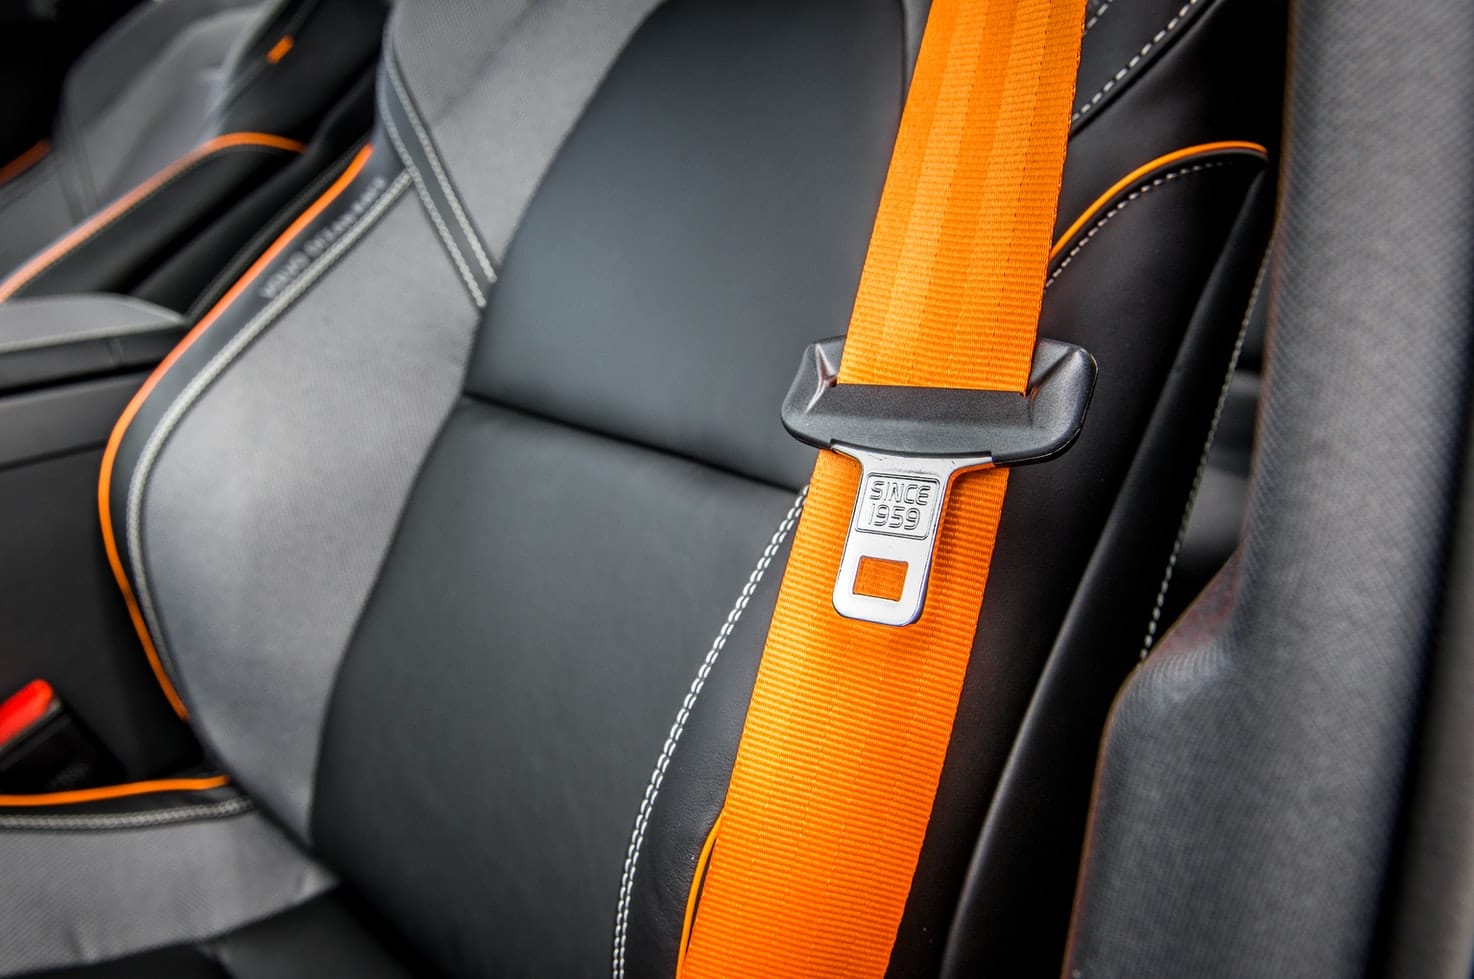 Car accessories, seats, safety belts